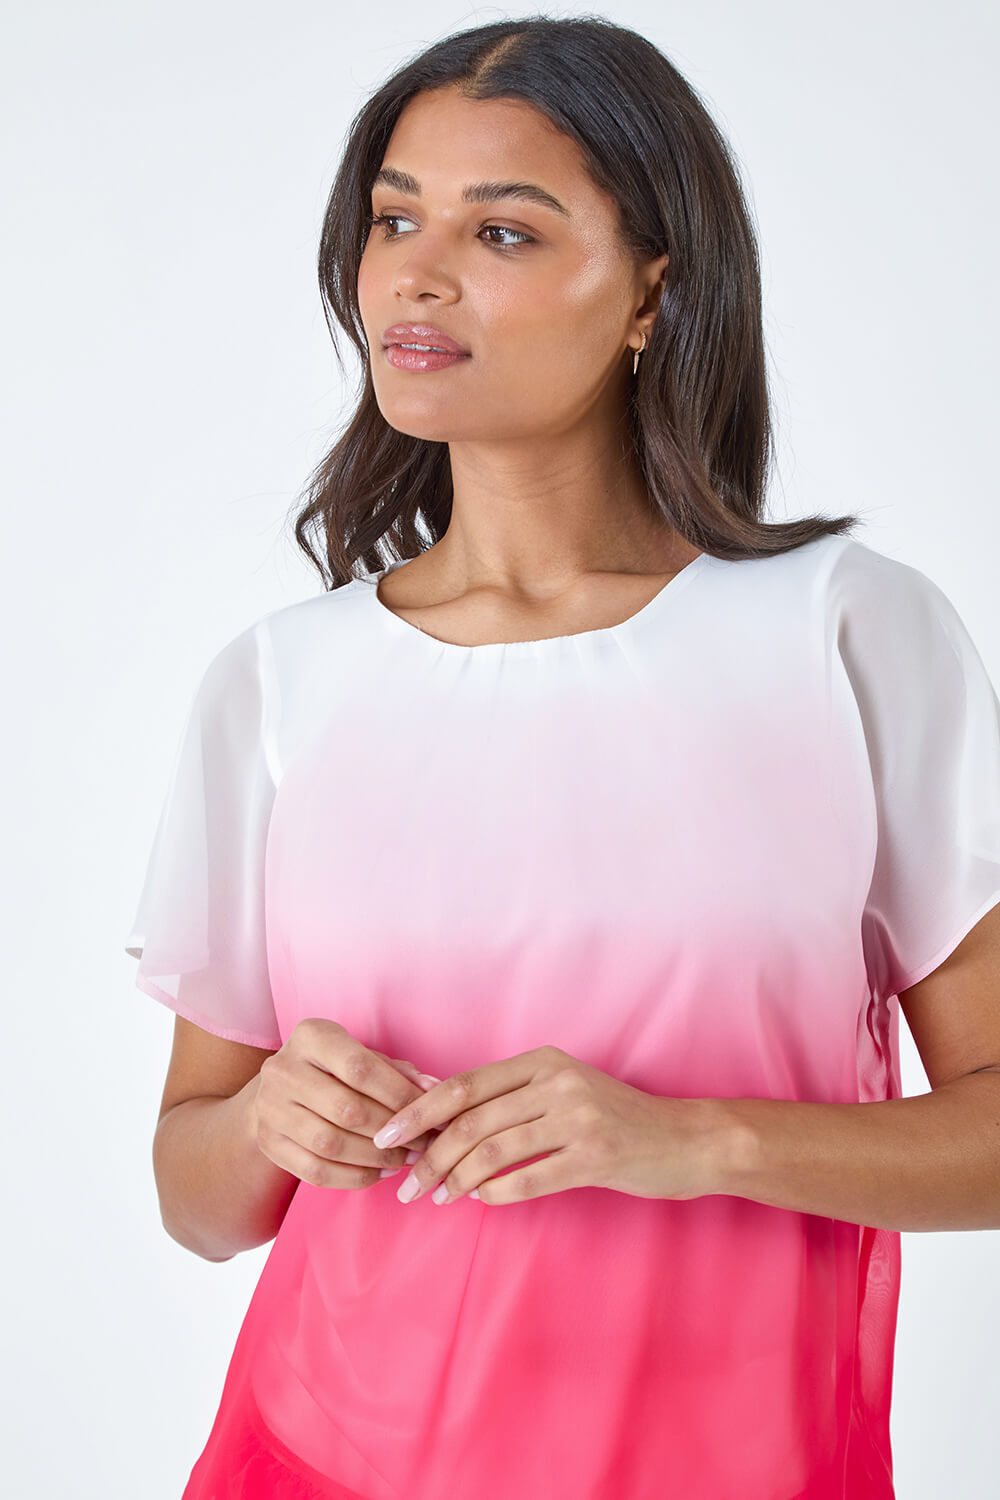 CORAL Ombre Chiffon Overlay Blouson Top, Image 4 of 5